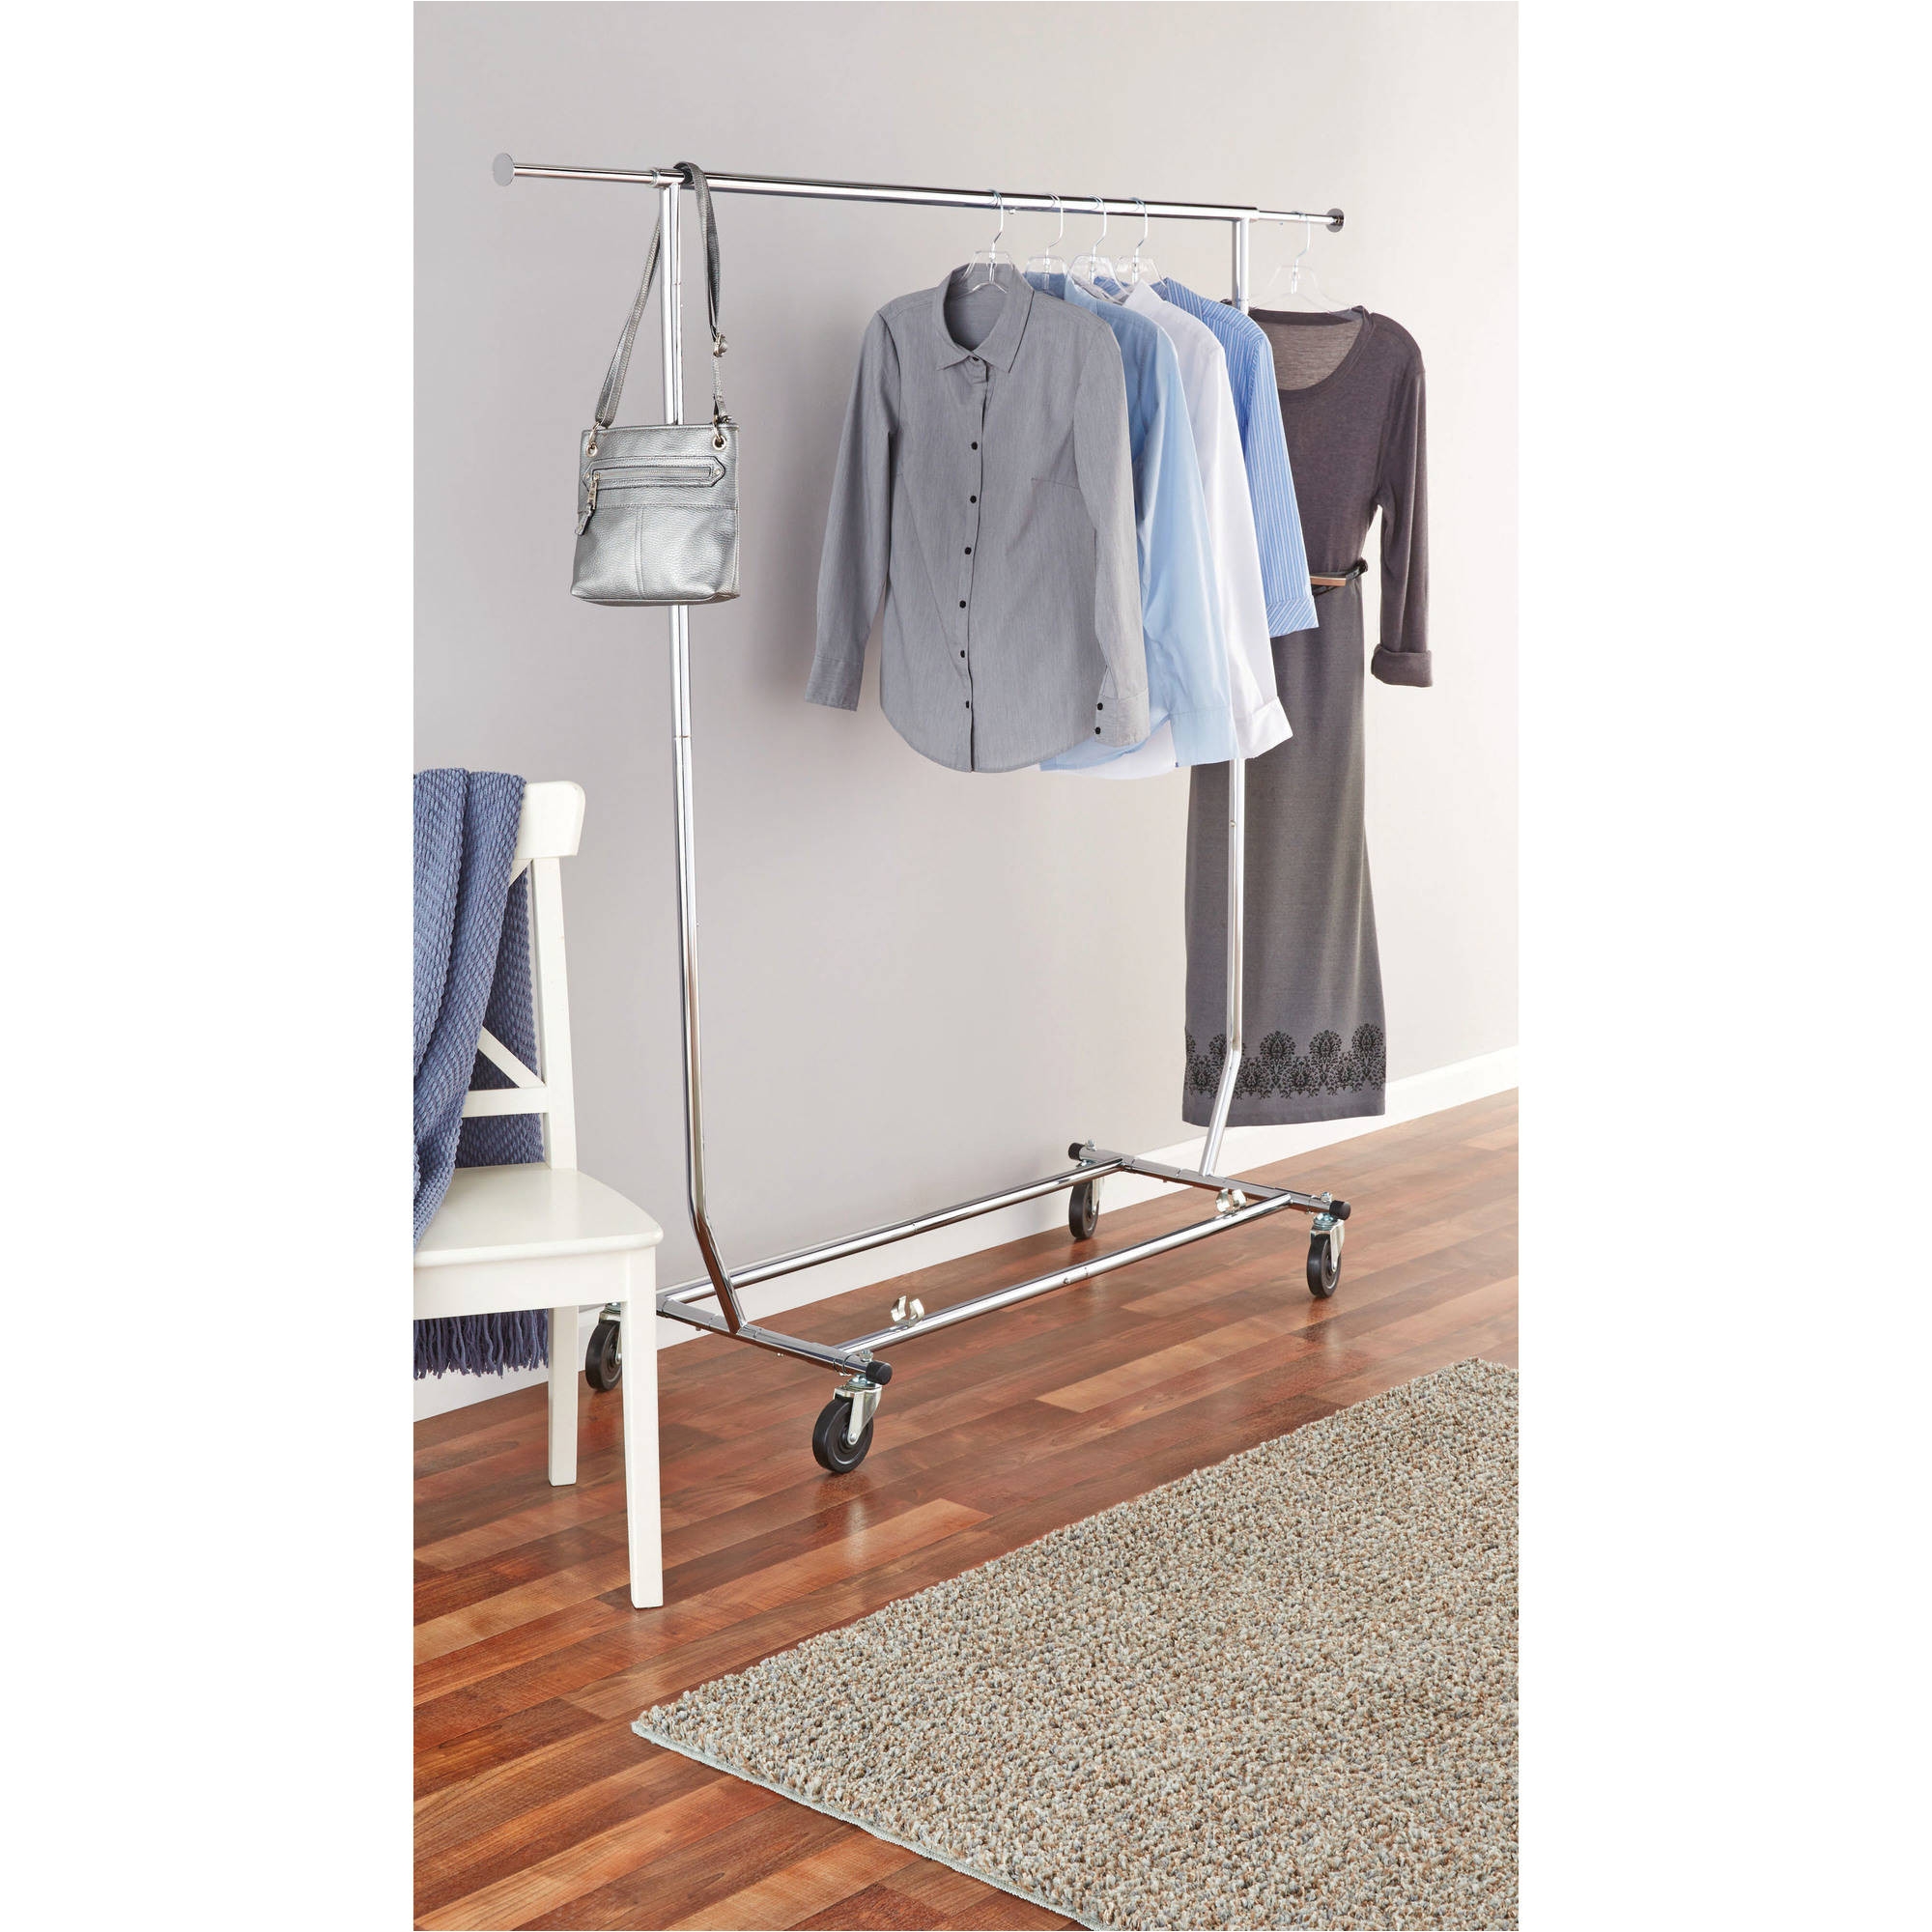 commercial single rolling clothes rack mainstays deluxe garment with wheels chrome walmart com awesome decorate imagey